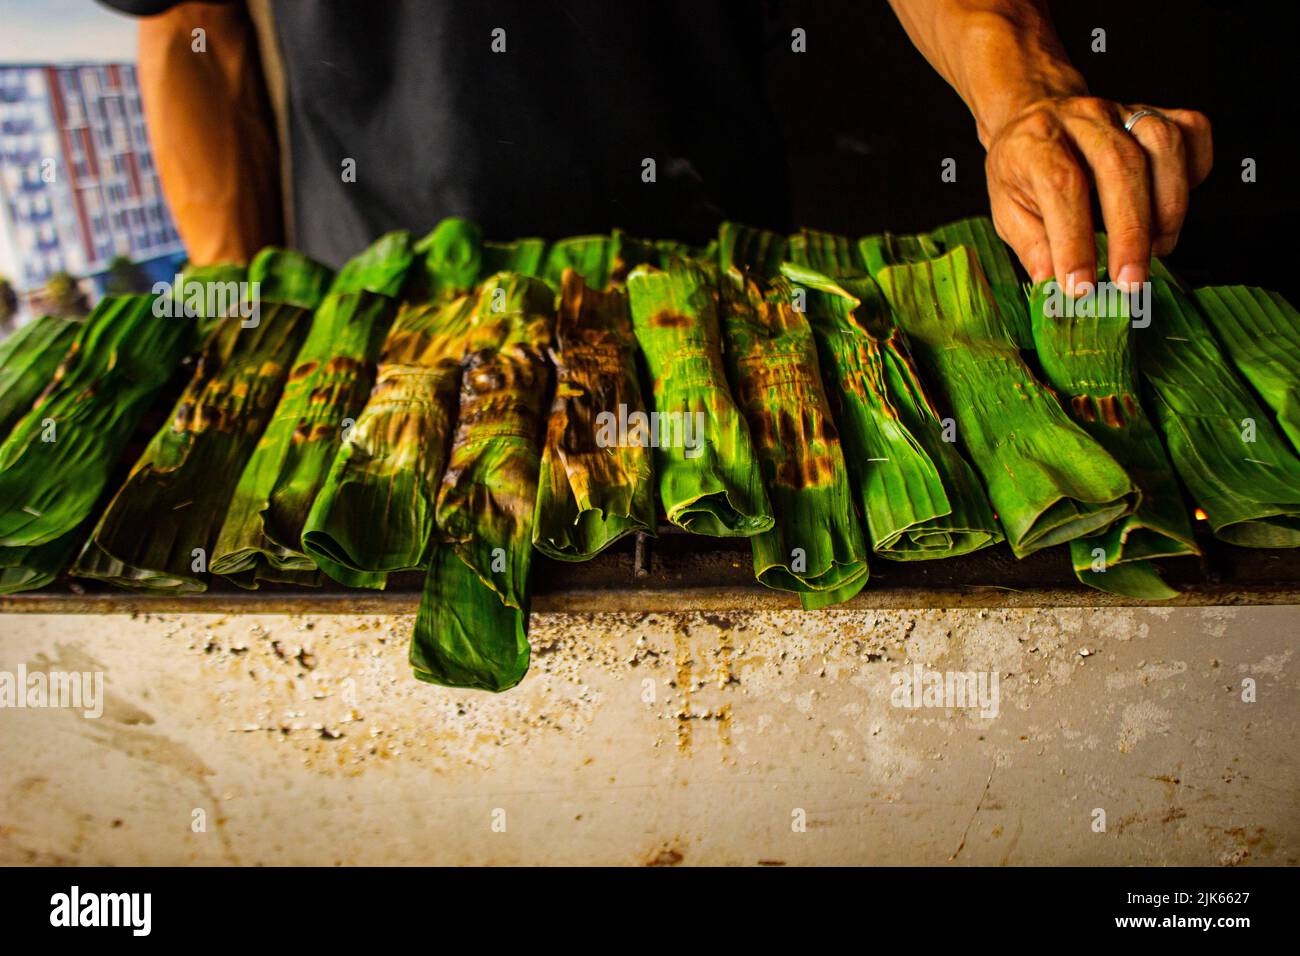 otak - otak is a food made from minced mackerel fish meat wrapped in banana leaves, baked, and served with spicy and sour sauce. otak-otak is traditio Stock Photo